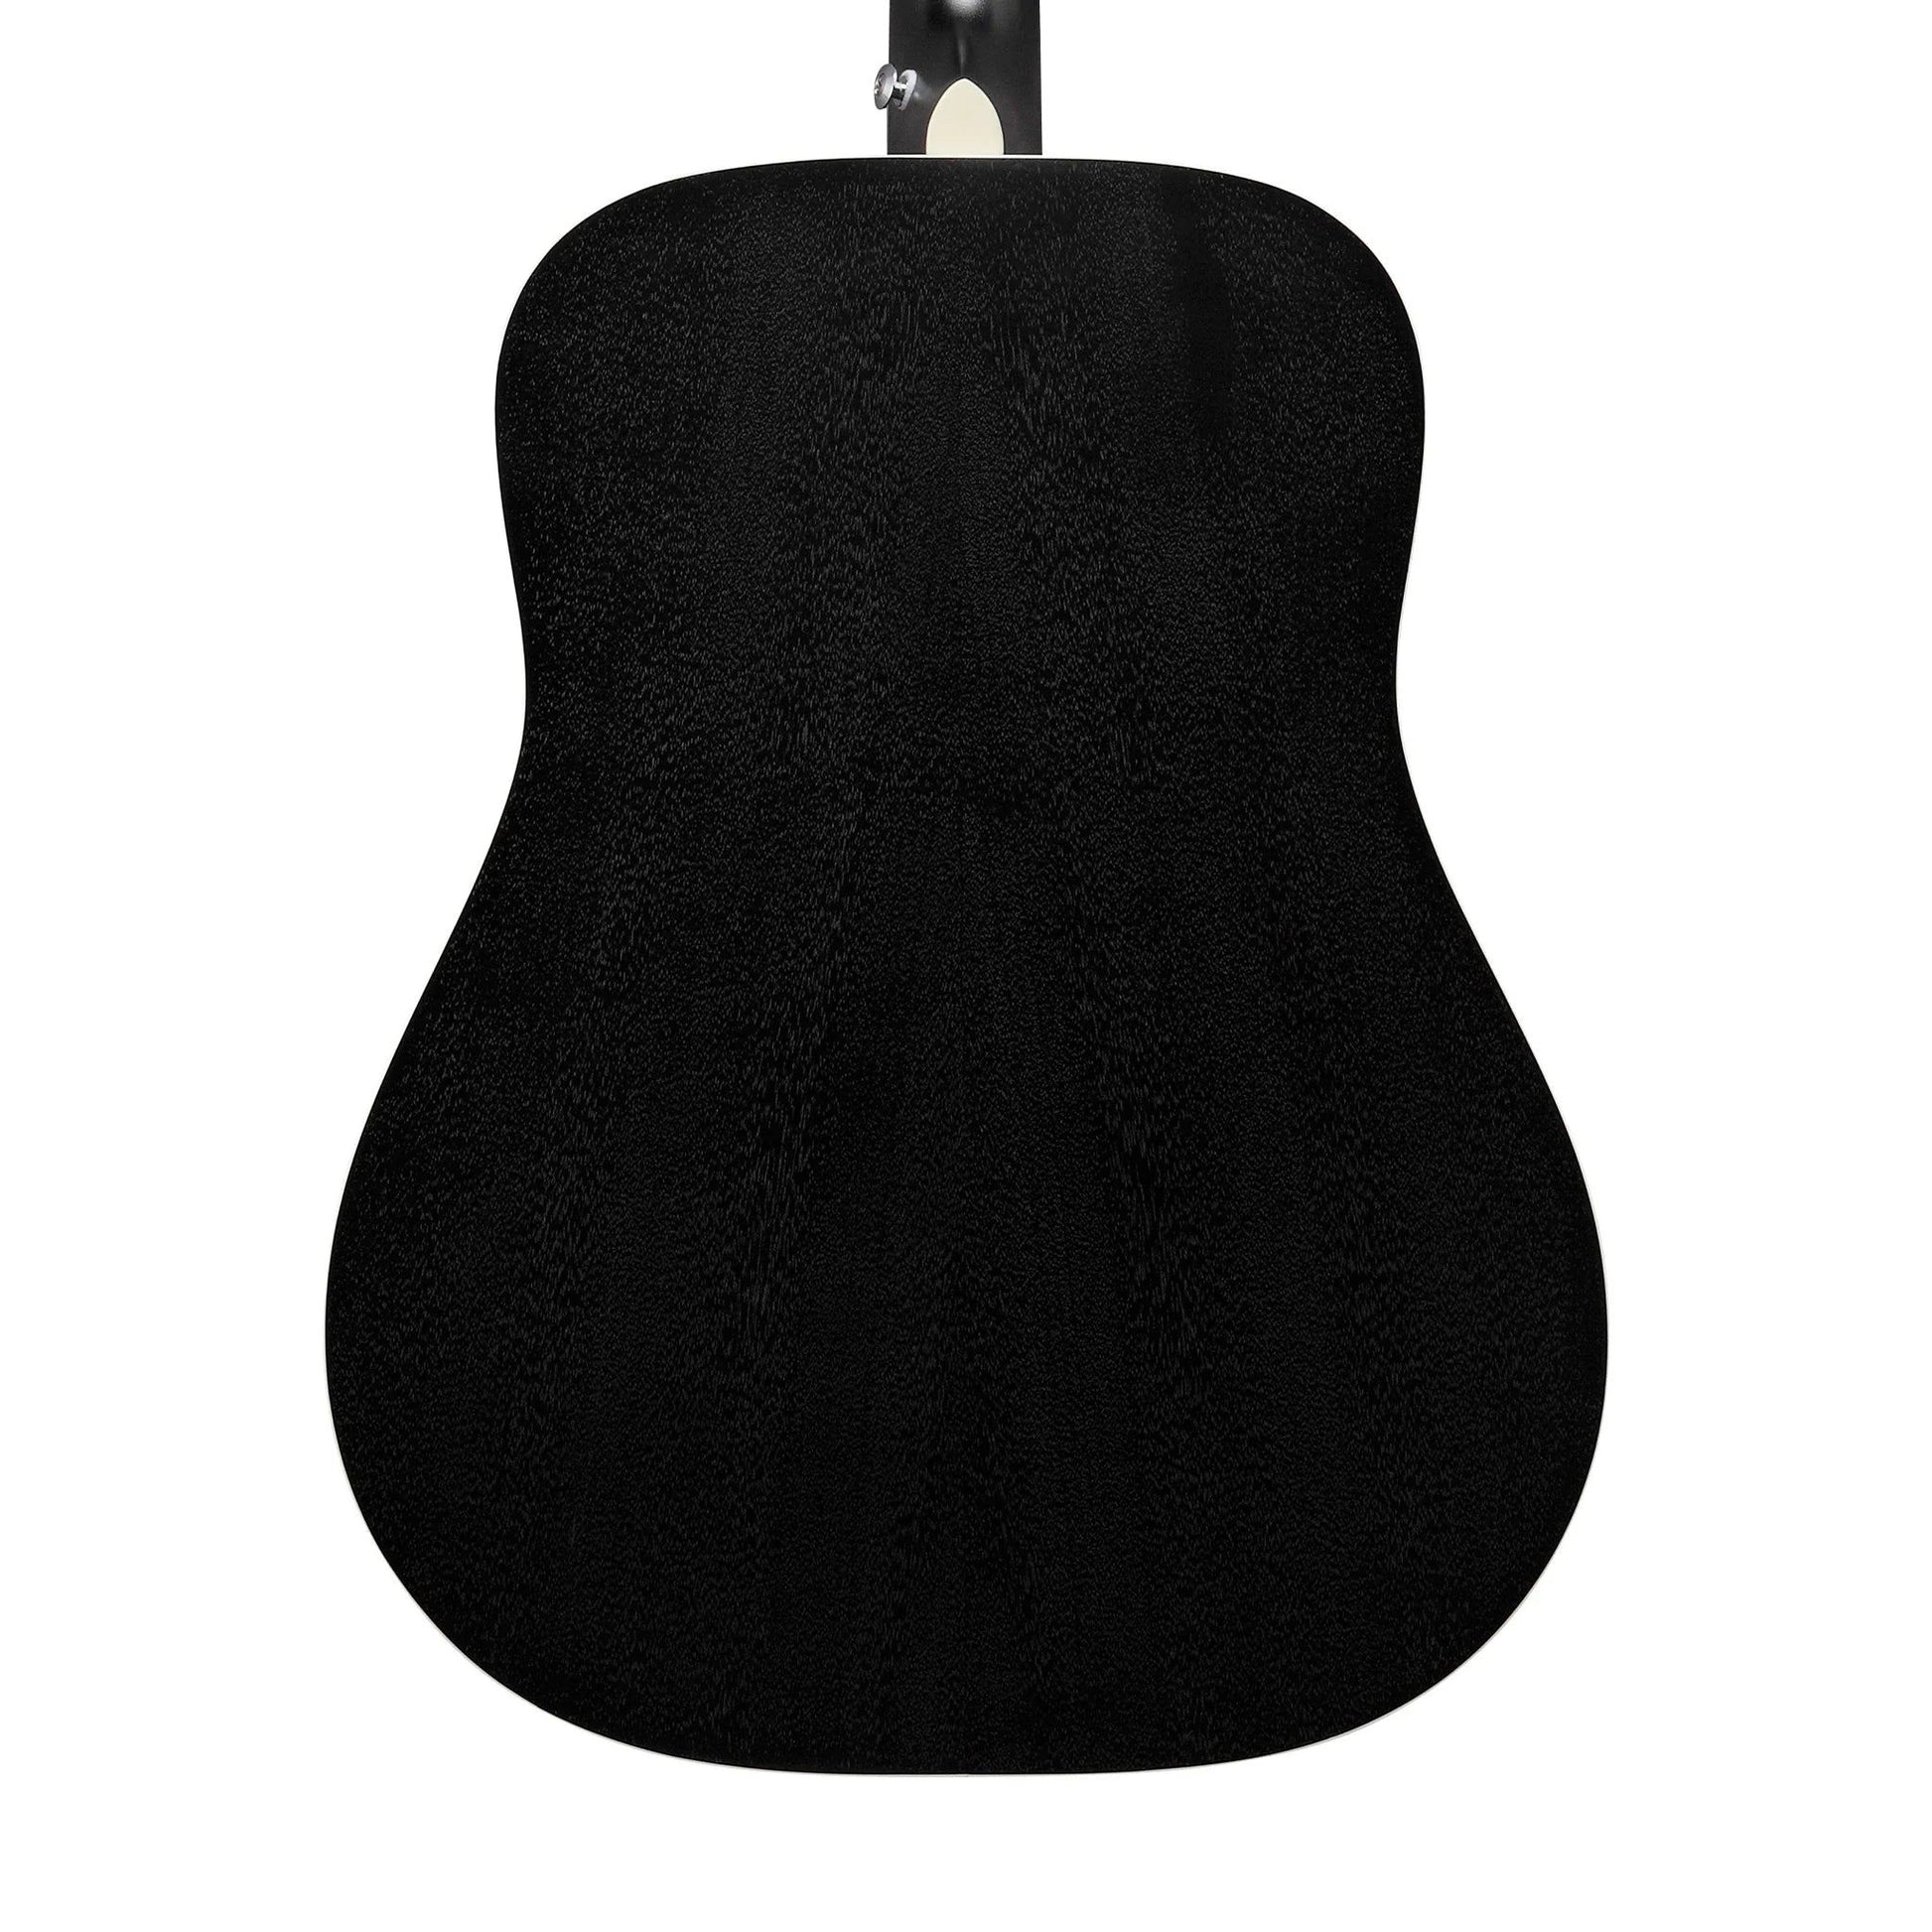 Đàn Guitar Acoustic Ibanez AW84 Weathered Black Open Pore - Việt Music